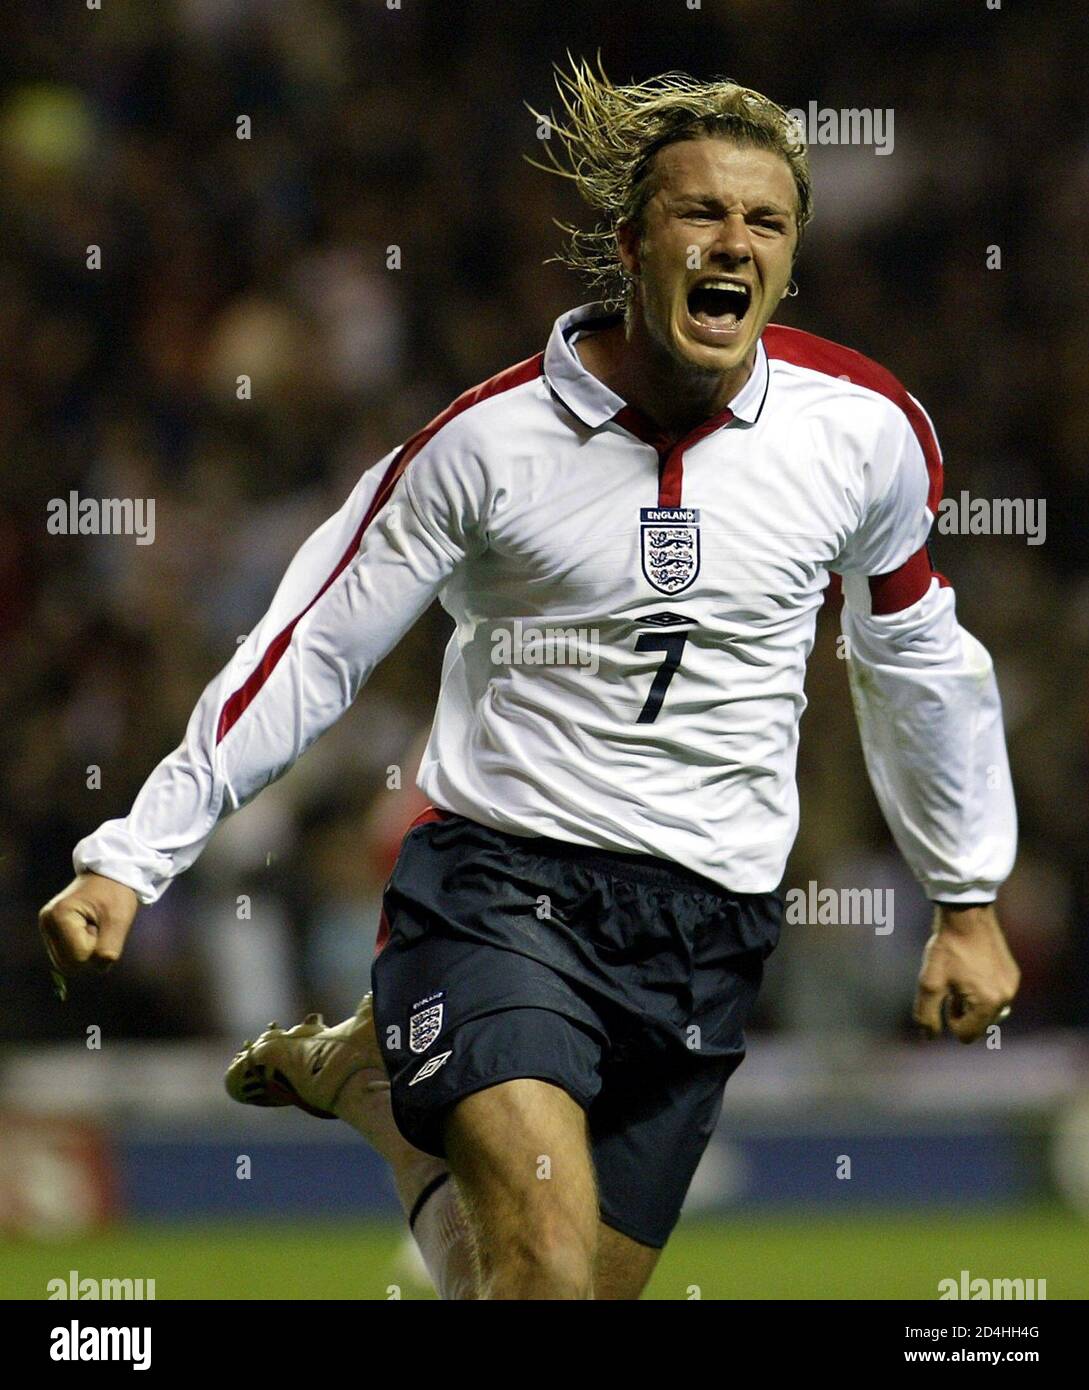 England's David Beckham celebrates his goal against [Turkey] in their  European Championship group seven qualifier match at the Stadium of Light  in Sunderland, England, April 2, 2003. Engand won the match 2-0